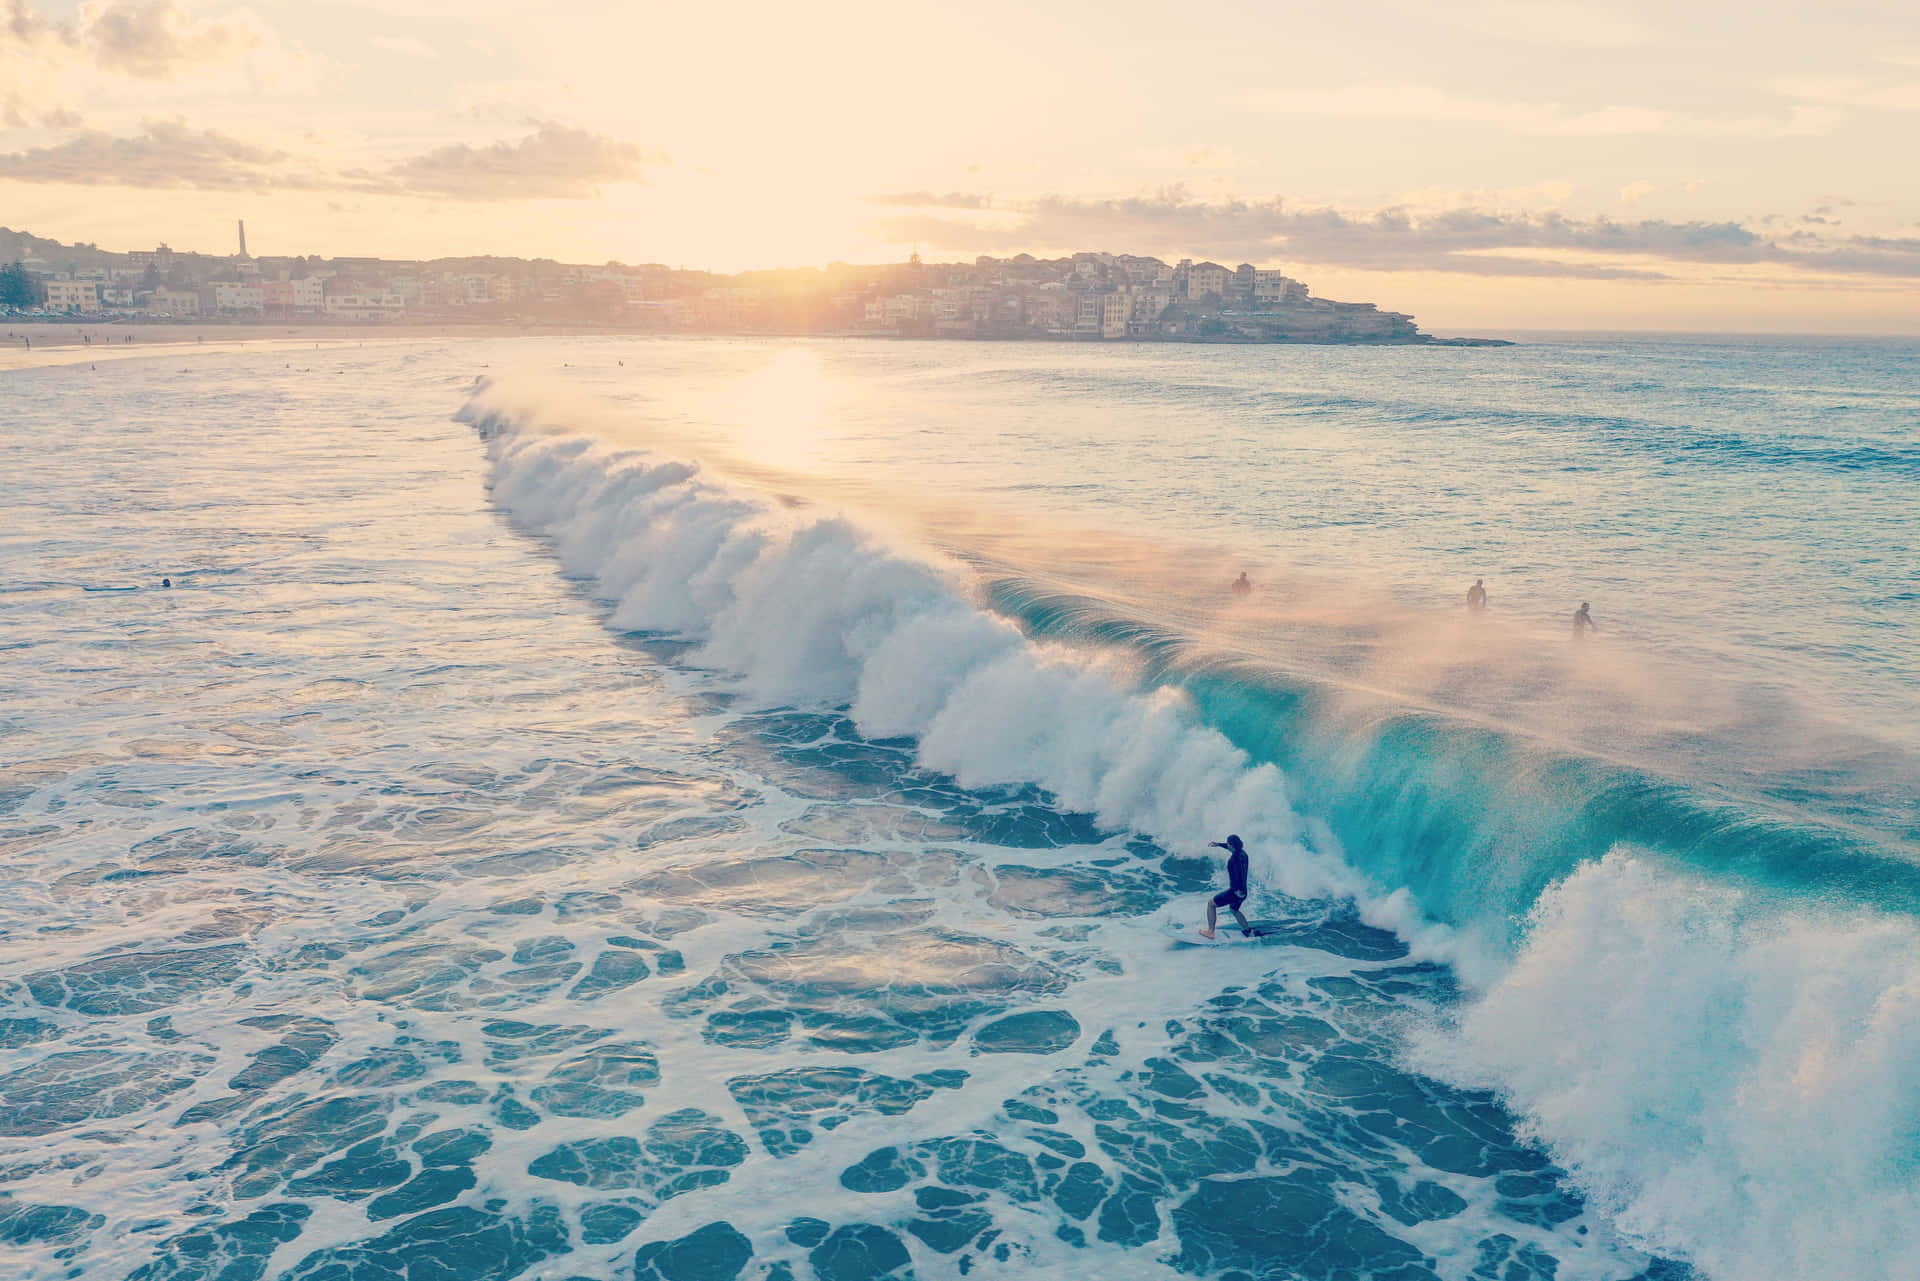 A Surfer Is Riding A Wave At Sunset